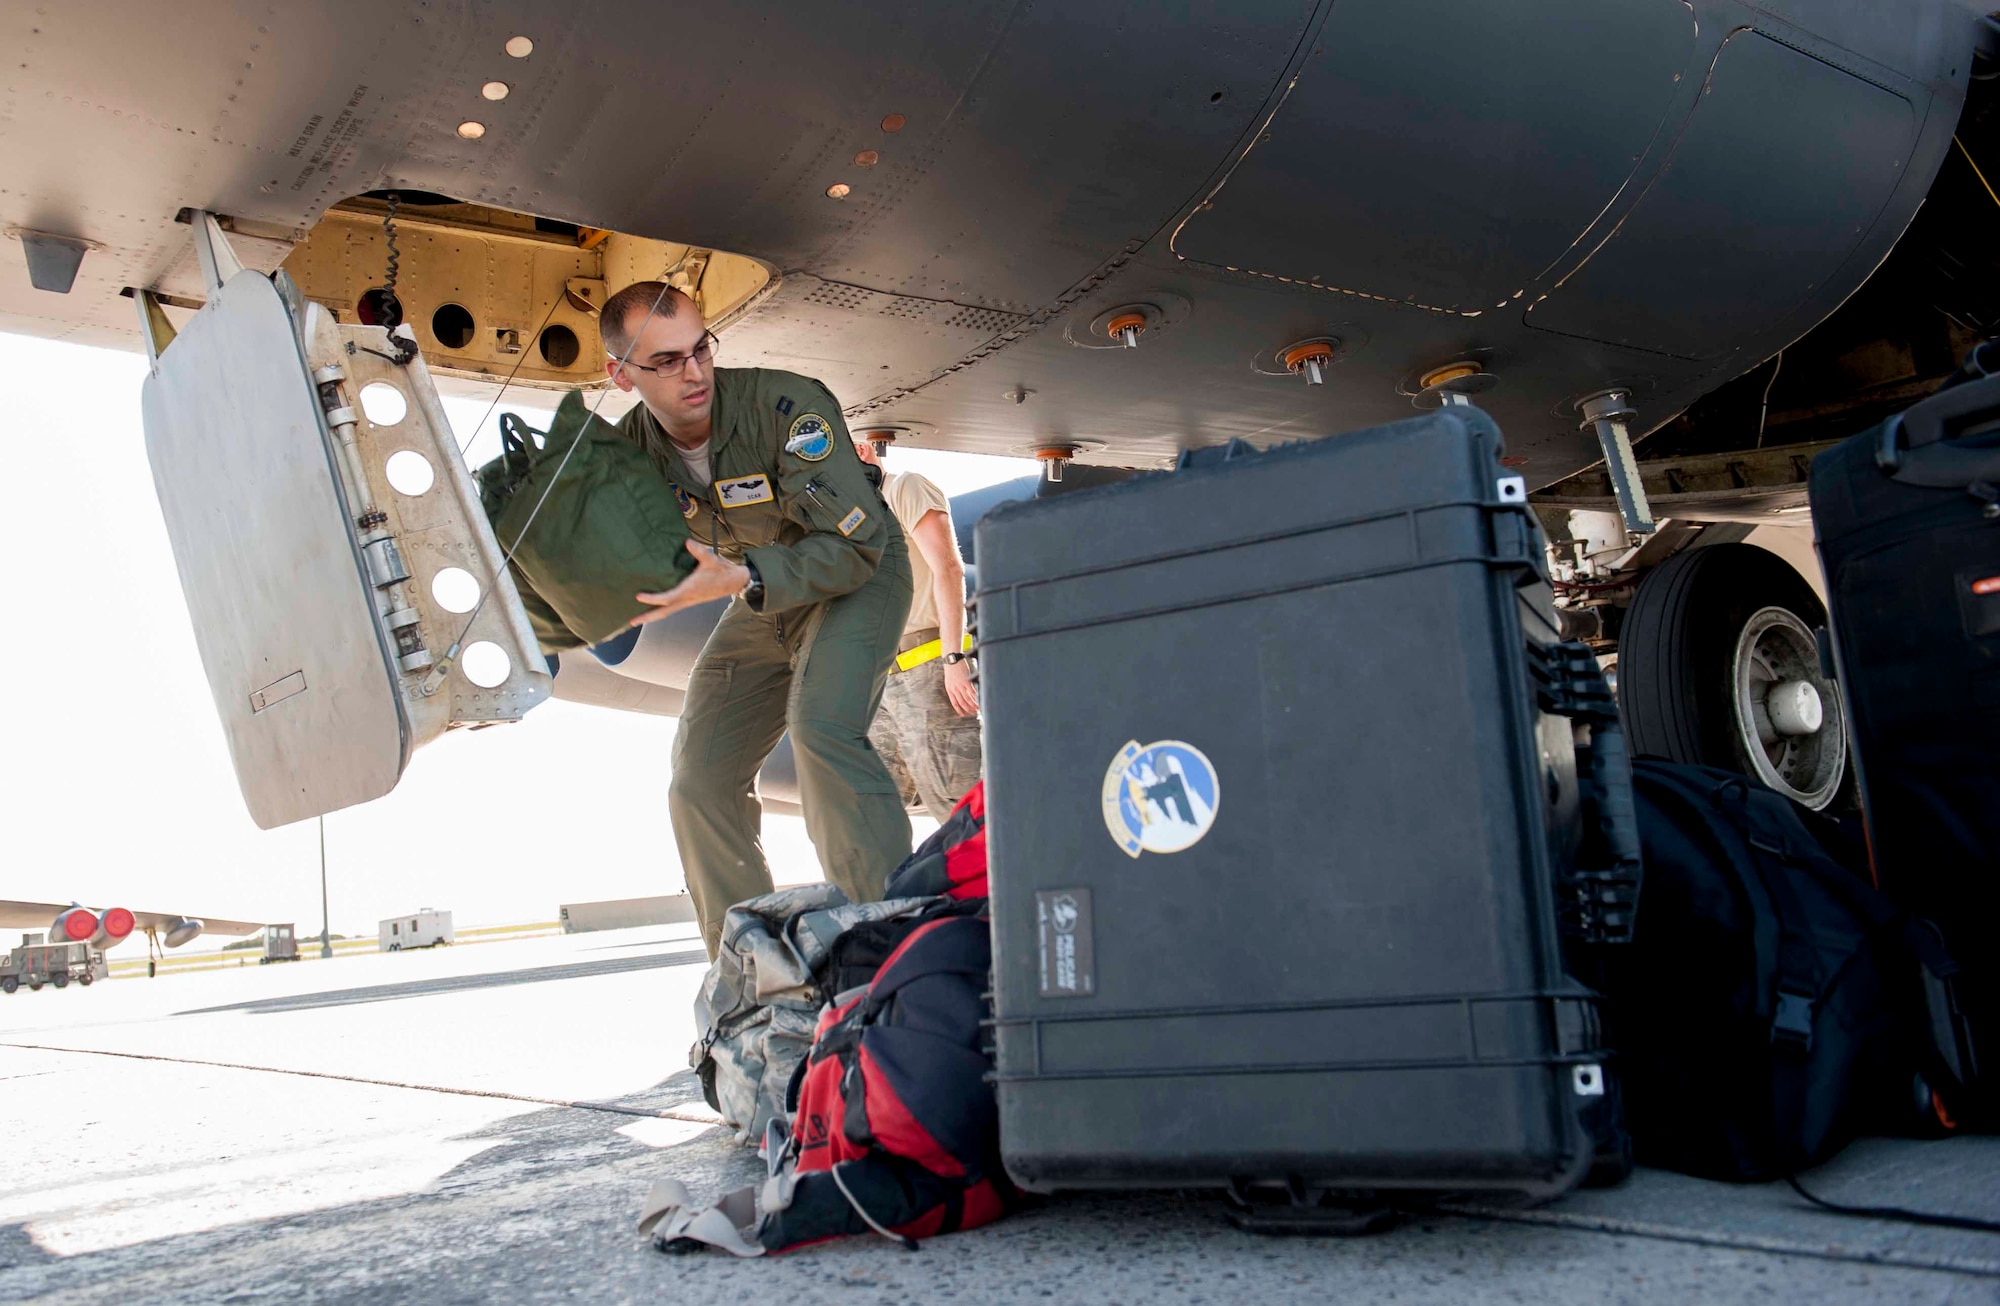 Capt. Jared, 69th Bomb Squadron, unloads bags from a B-52H Stratofortress at Minot Air Force Base, N.D., July 31, 2015. 69th BS crews returned from a three-week-long exercise, Red Flag 15-3, which took place at Nellis AFB, Nev. (U.S. Air Force photo/Airman 1st Class Sahara L. Fales)